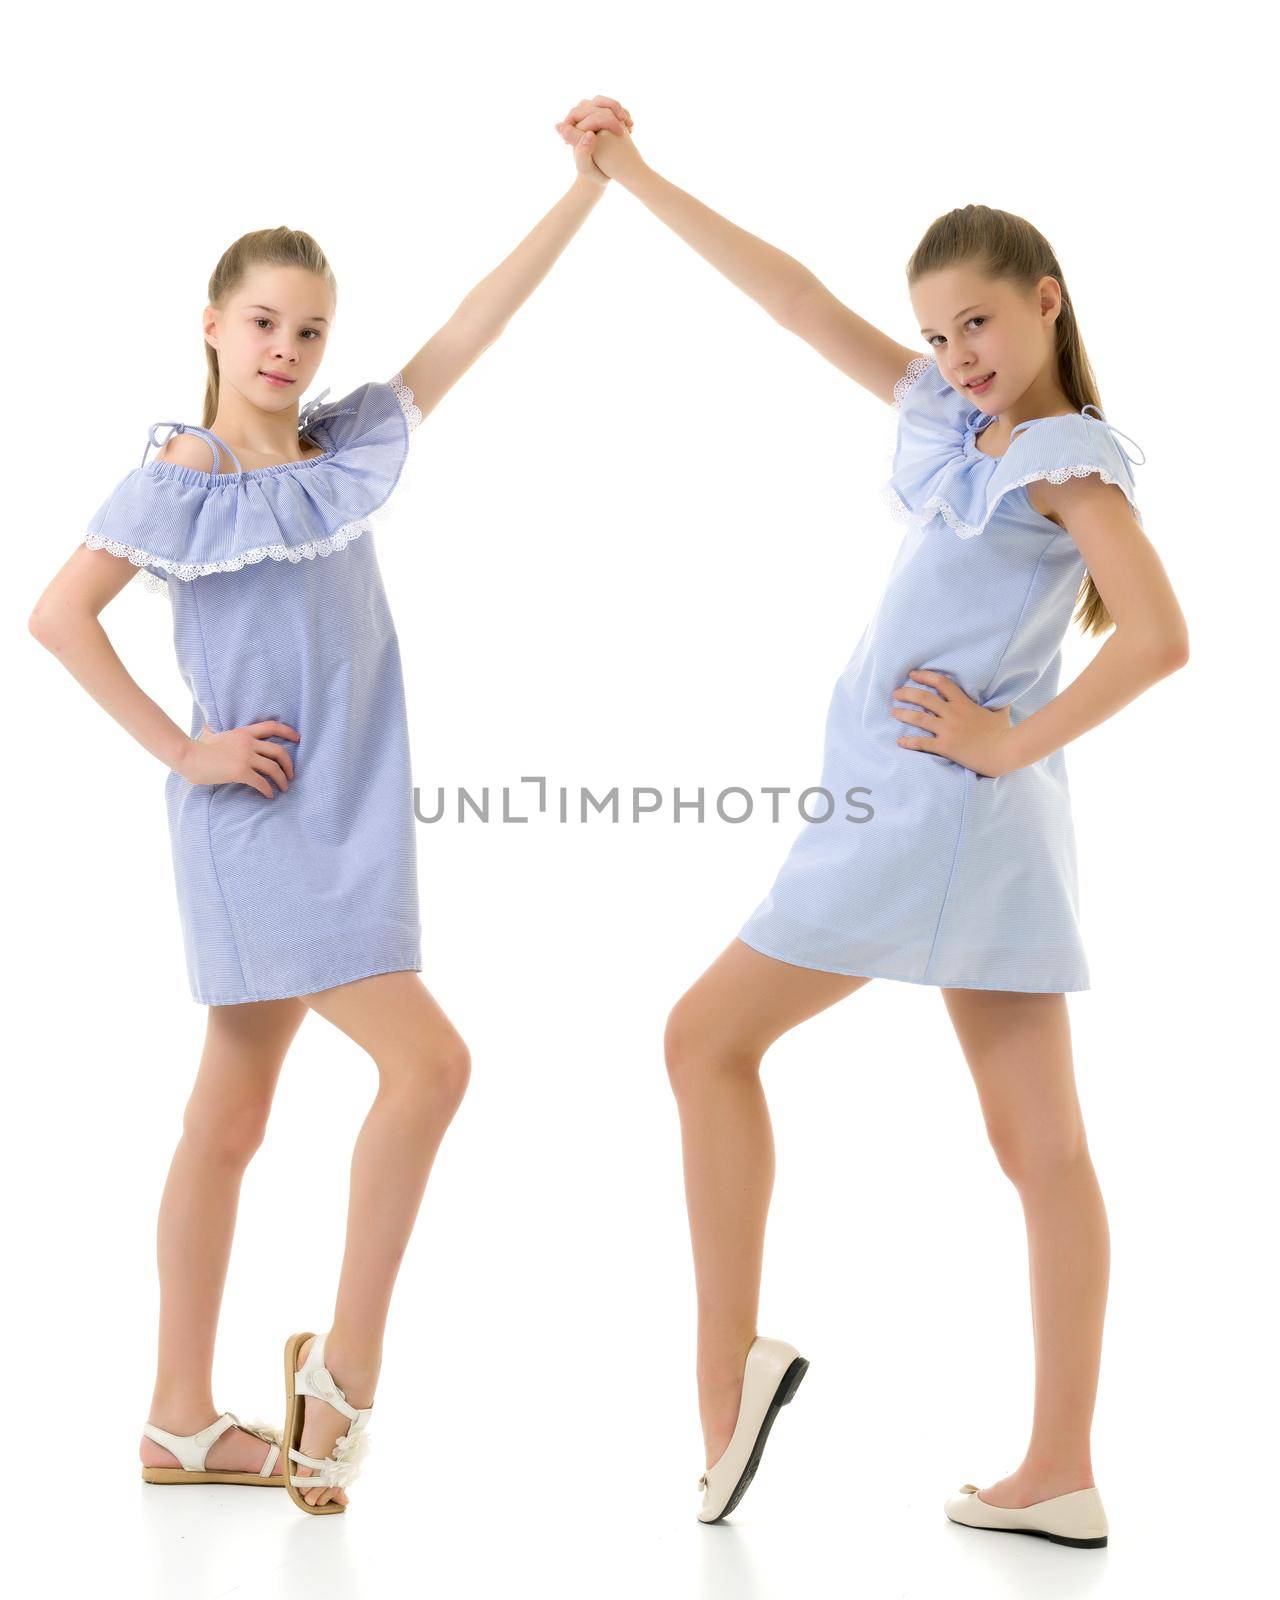 Two Pretty Twin Sisters in Identical Light Blue Dresses Holding Each Other Hand and Raising it over their Head, Beautiful Girls in Fashionable Clothes Posing in Studio Against White Background